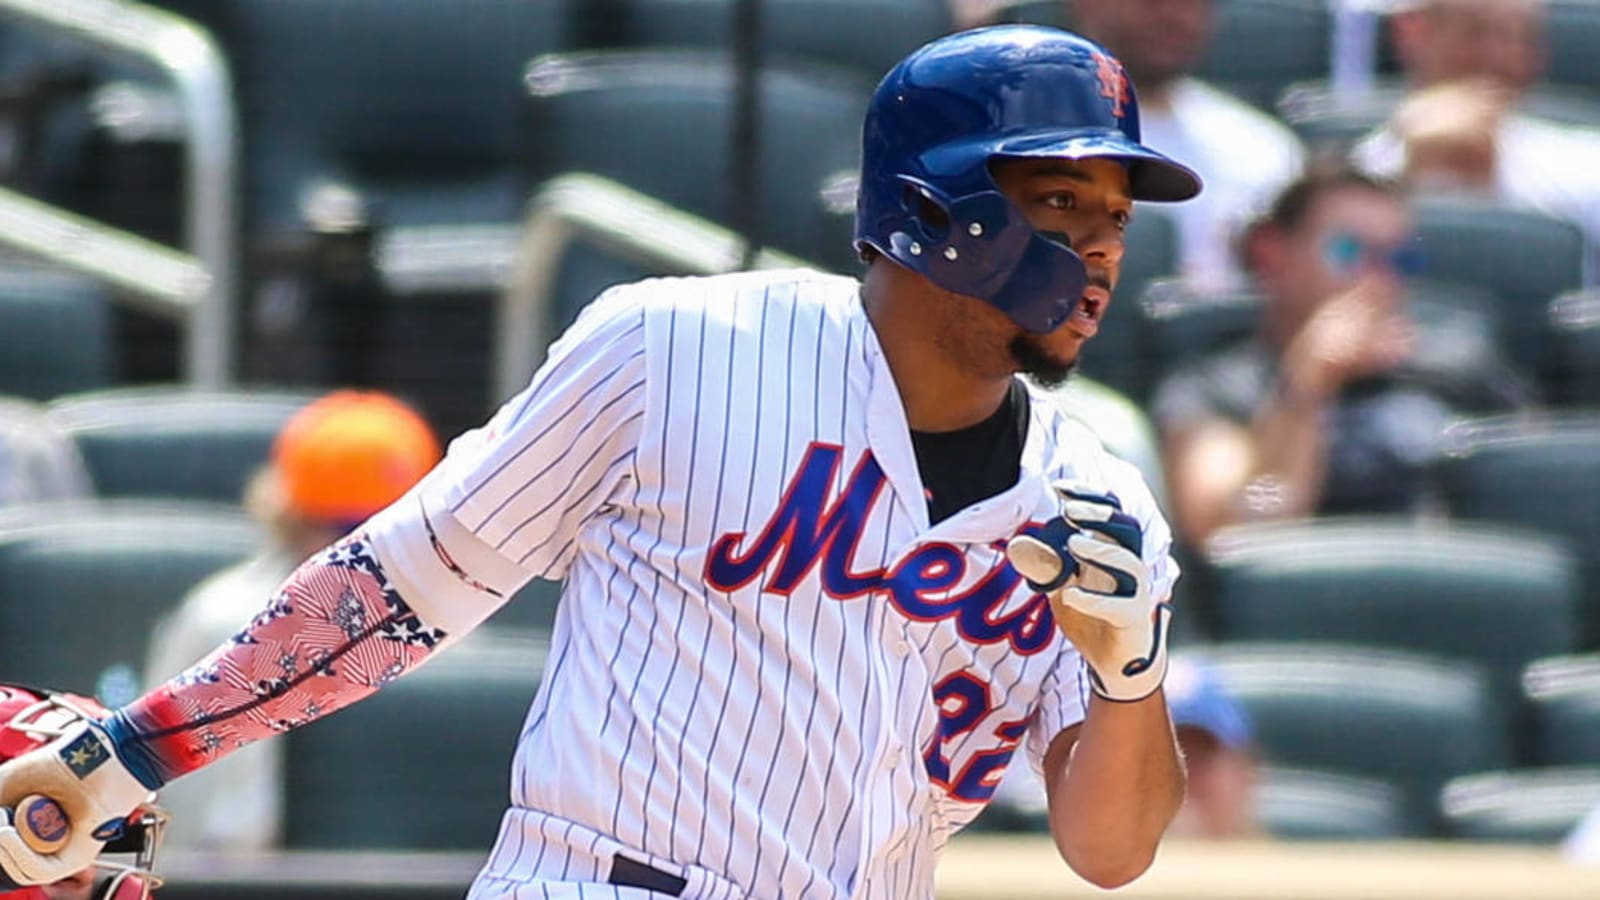 Dominic Smith could be a trade piece for the Mets